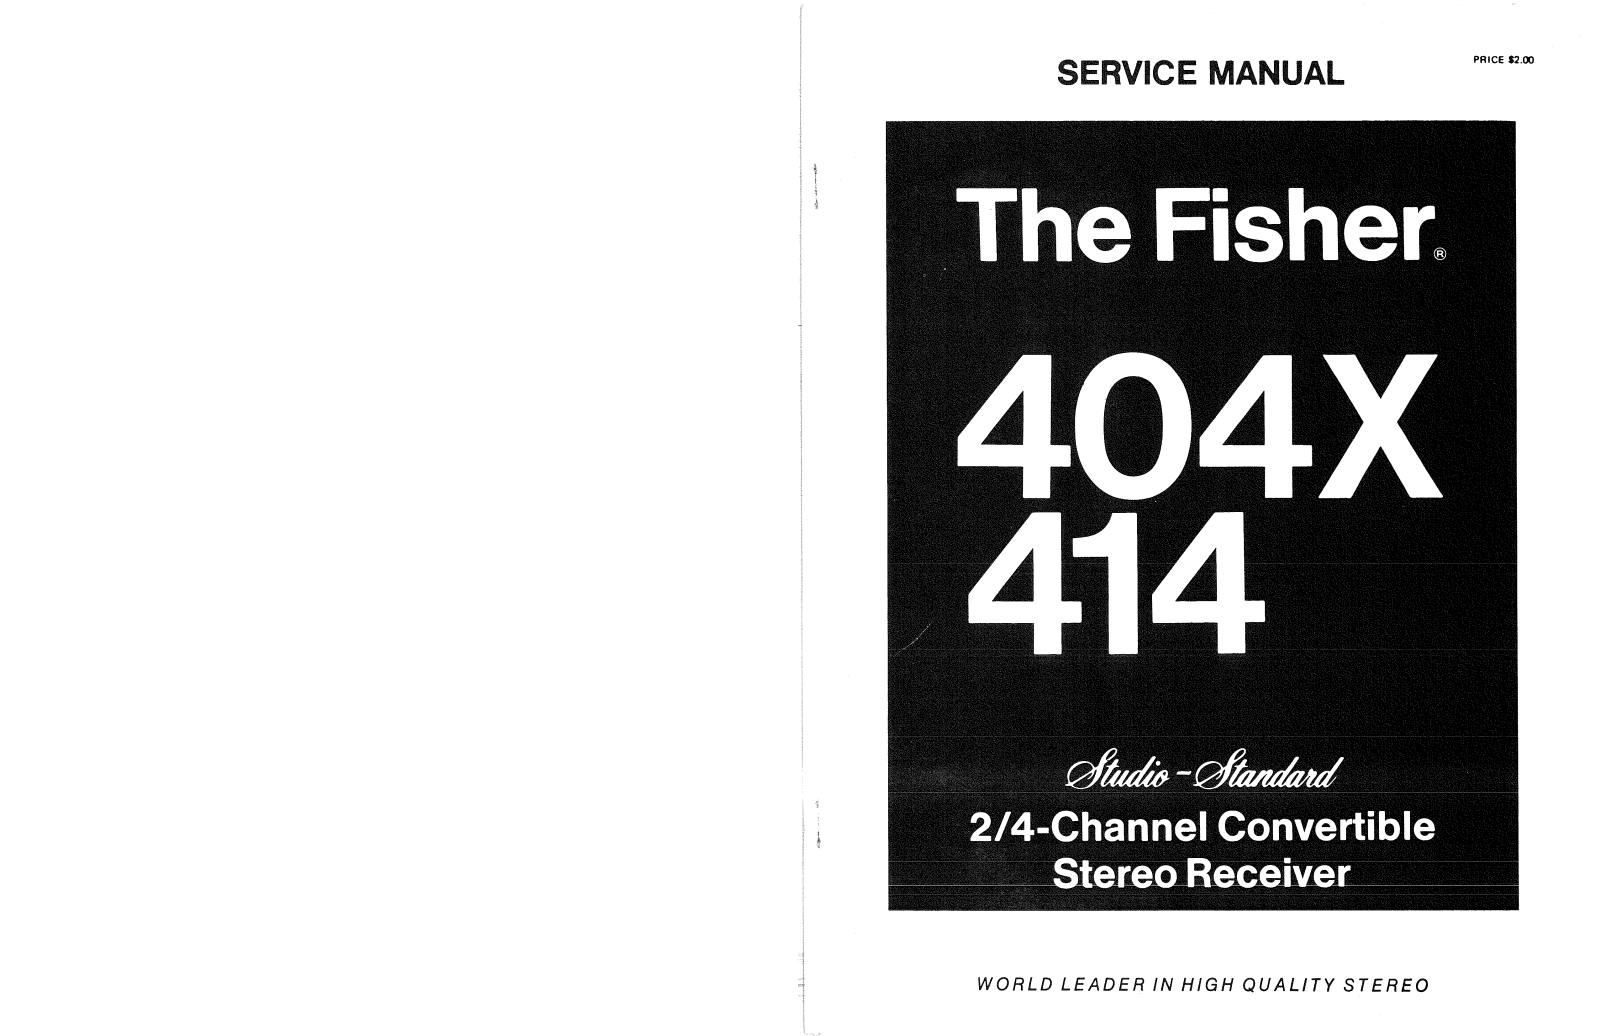 Fisher 404-X, 414 Service manual